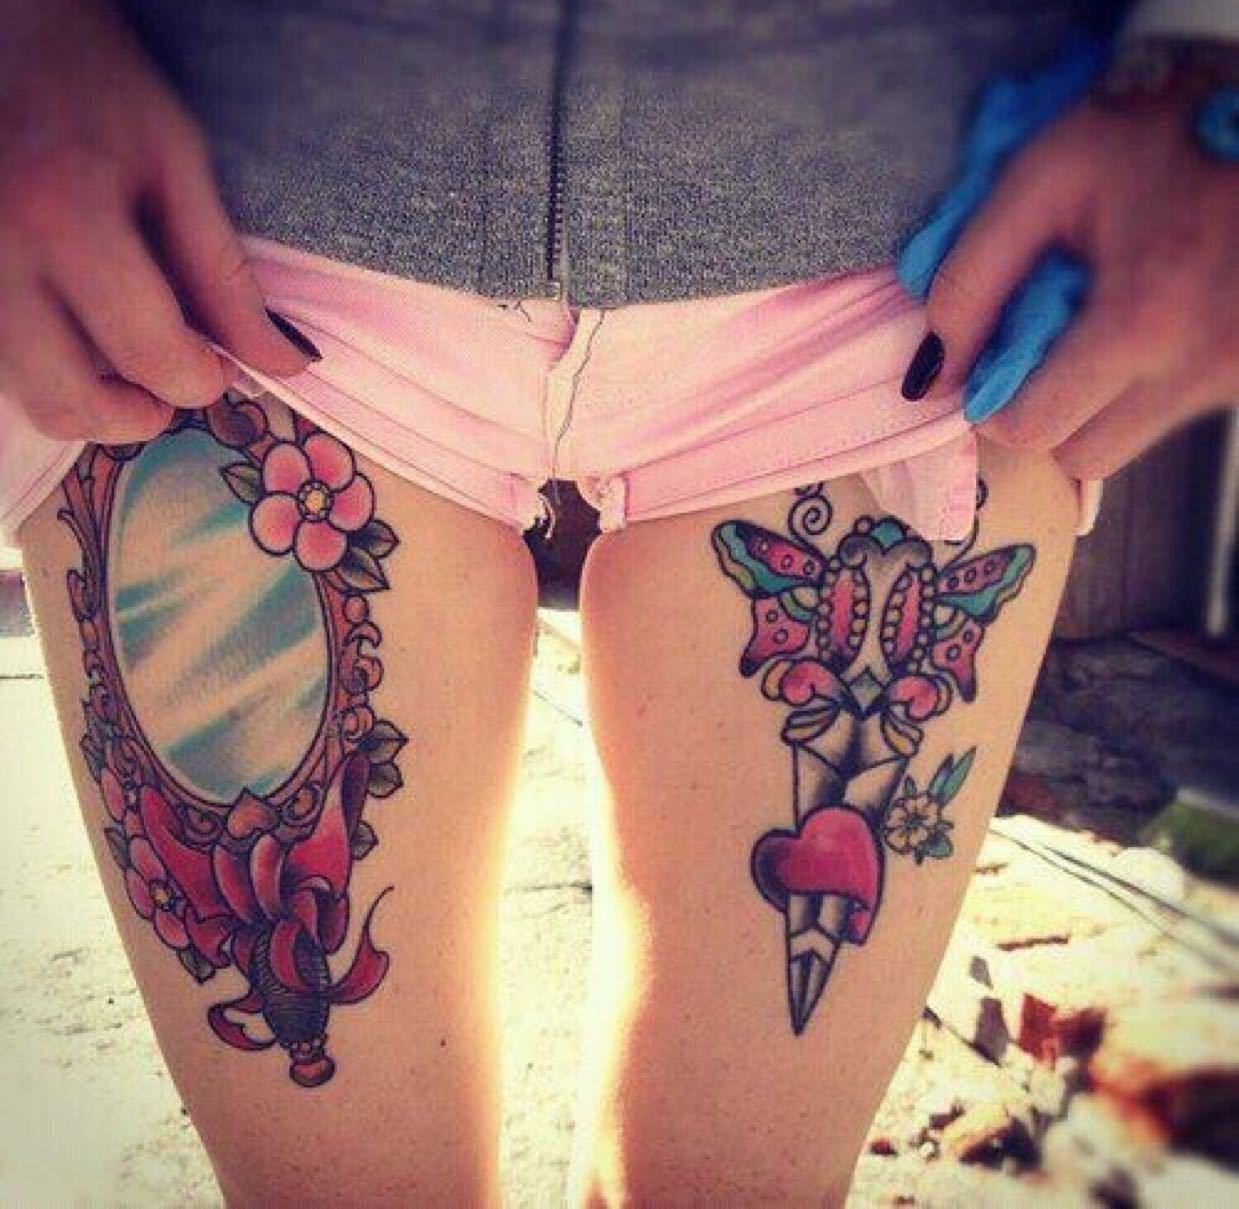 Dagger Heart And Hand Mirror Tattoos On Both Thigh